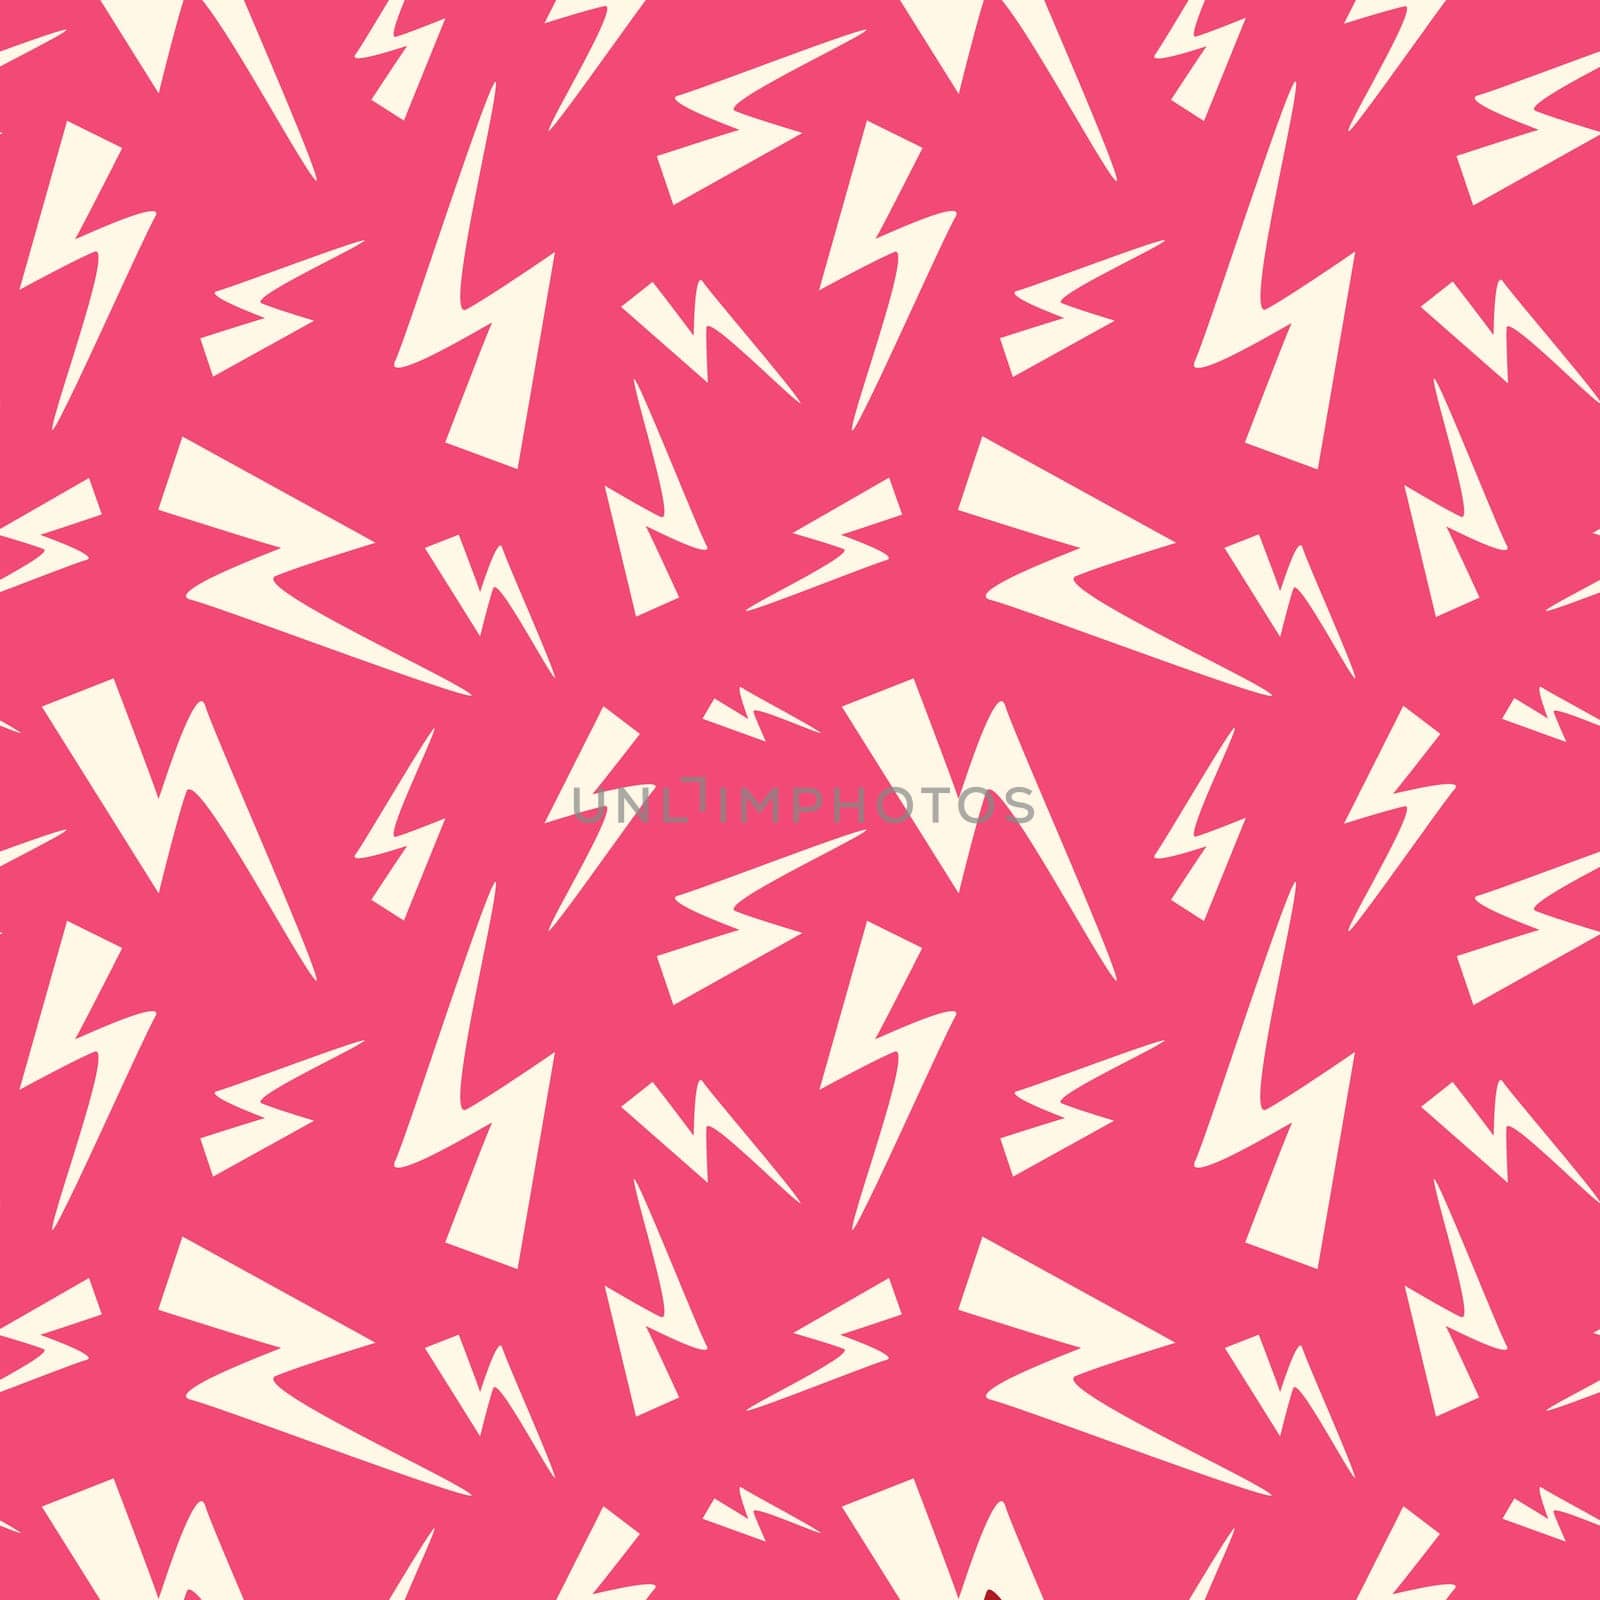 A pink and white pattern of lightning bolts by Dustick